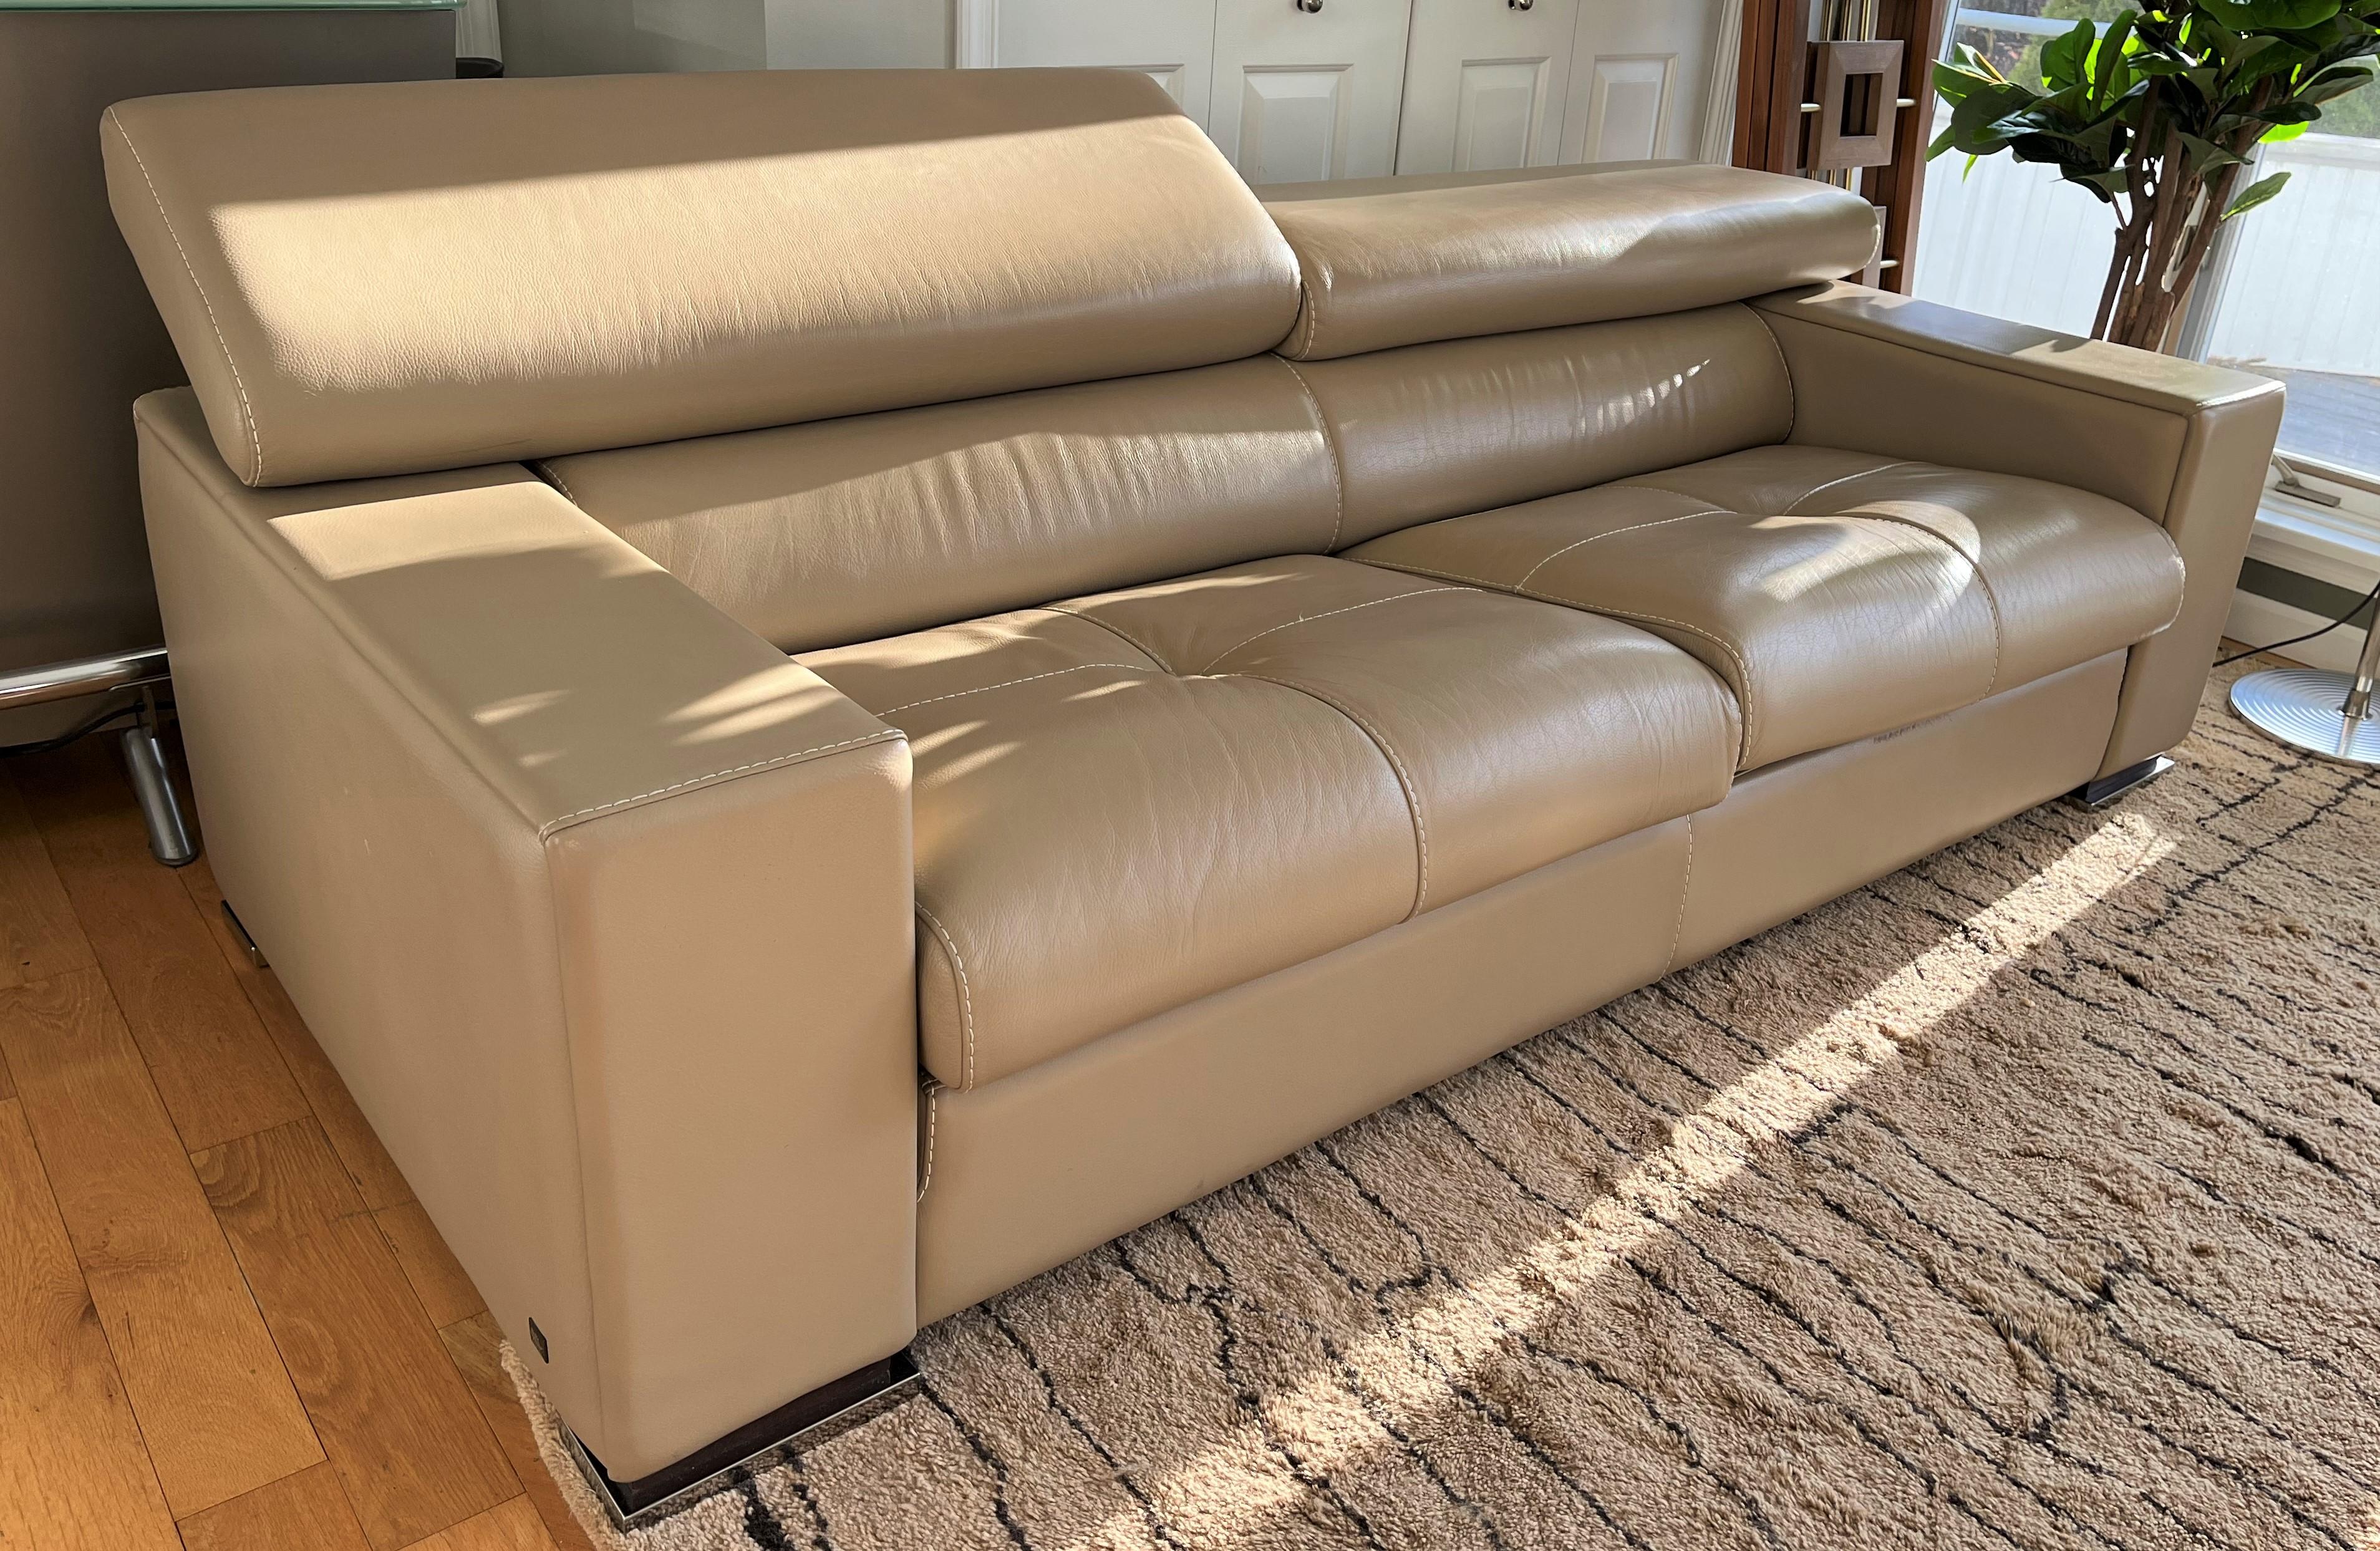 Gamma Arredamenti leather sofa in beige color. Legs have a dark brown finish to wood & chrome finish to metal. Solid wooden frame. Back cushions with individual headrest mechanism.

